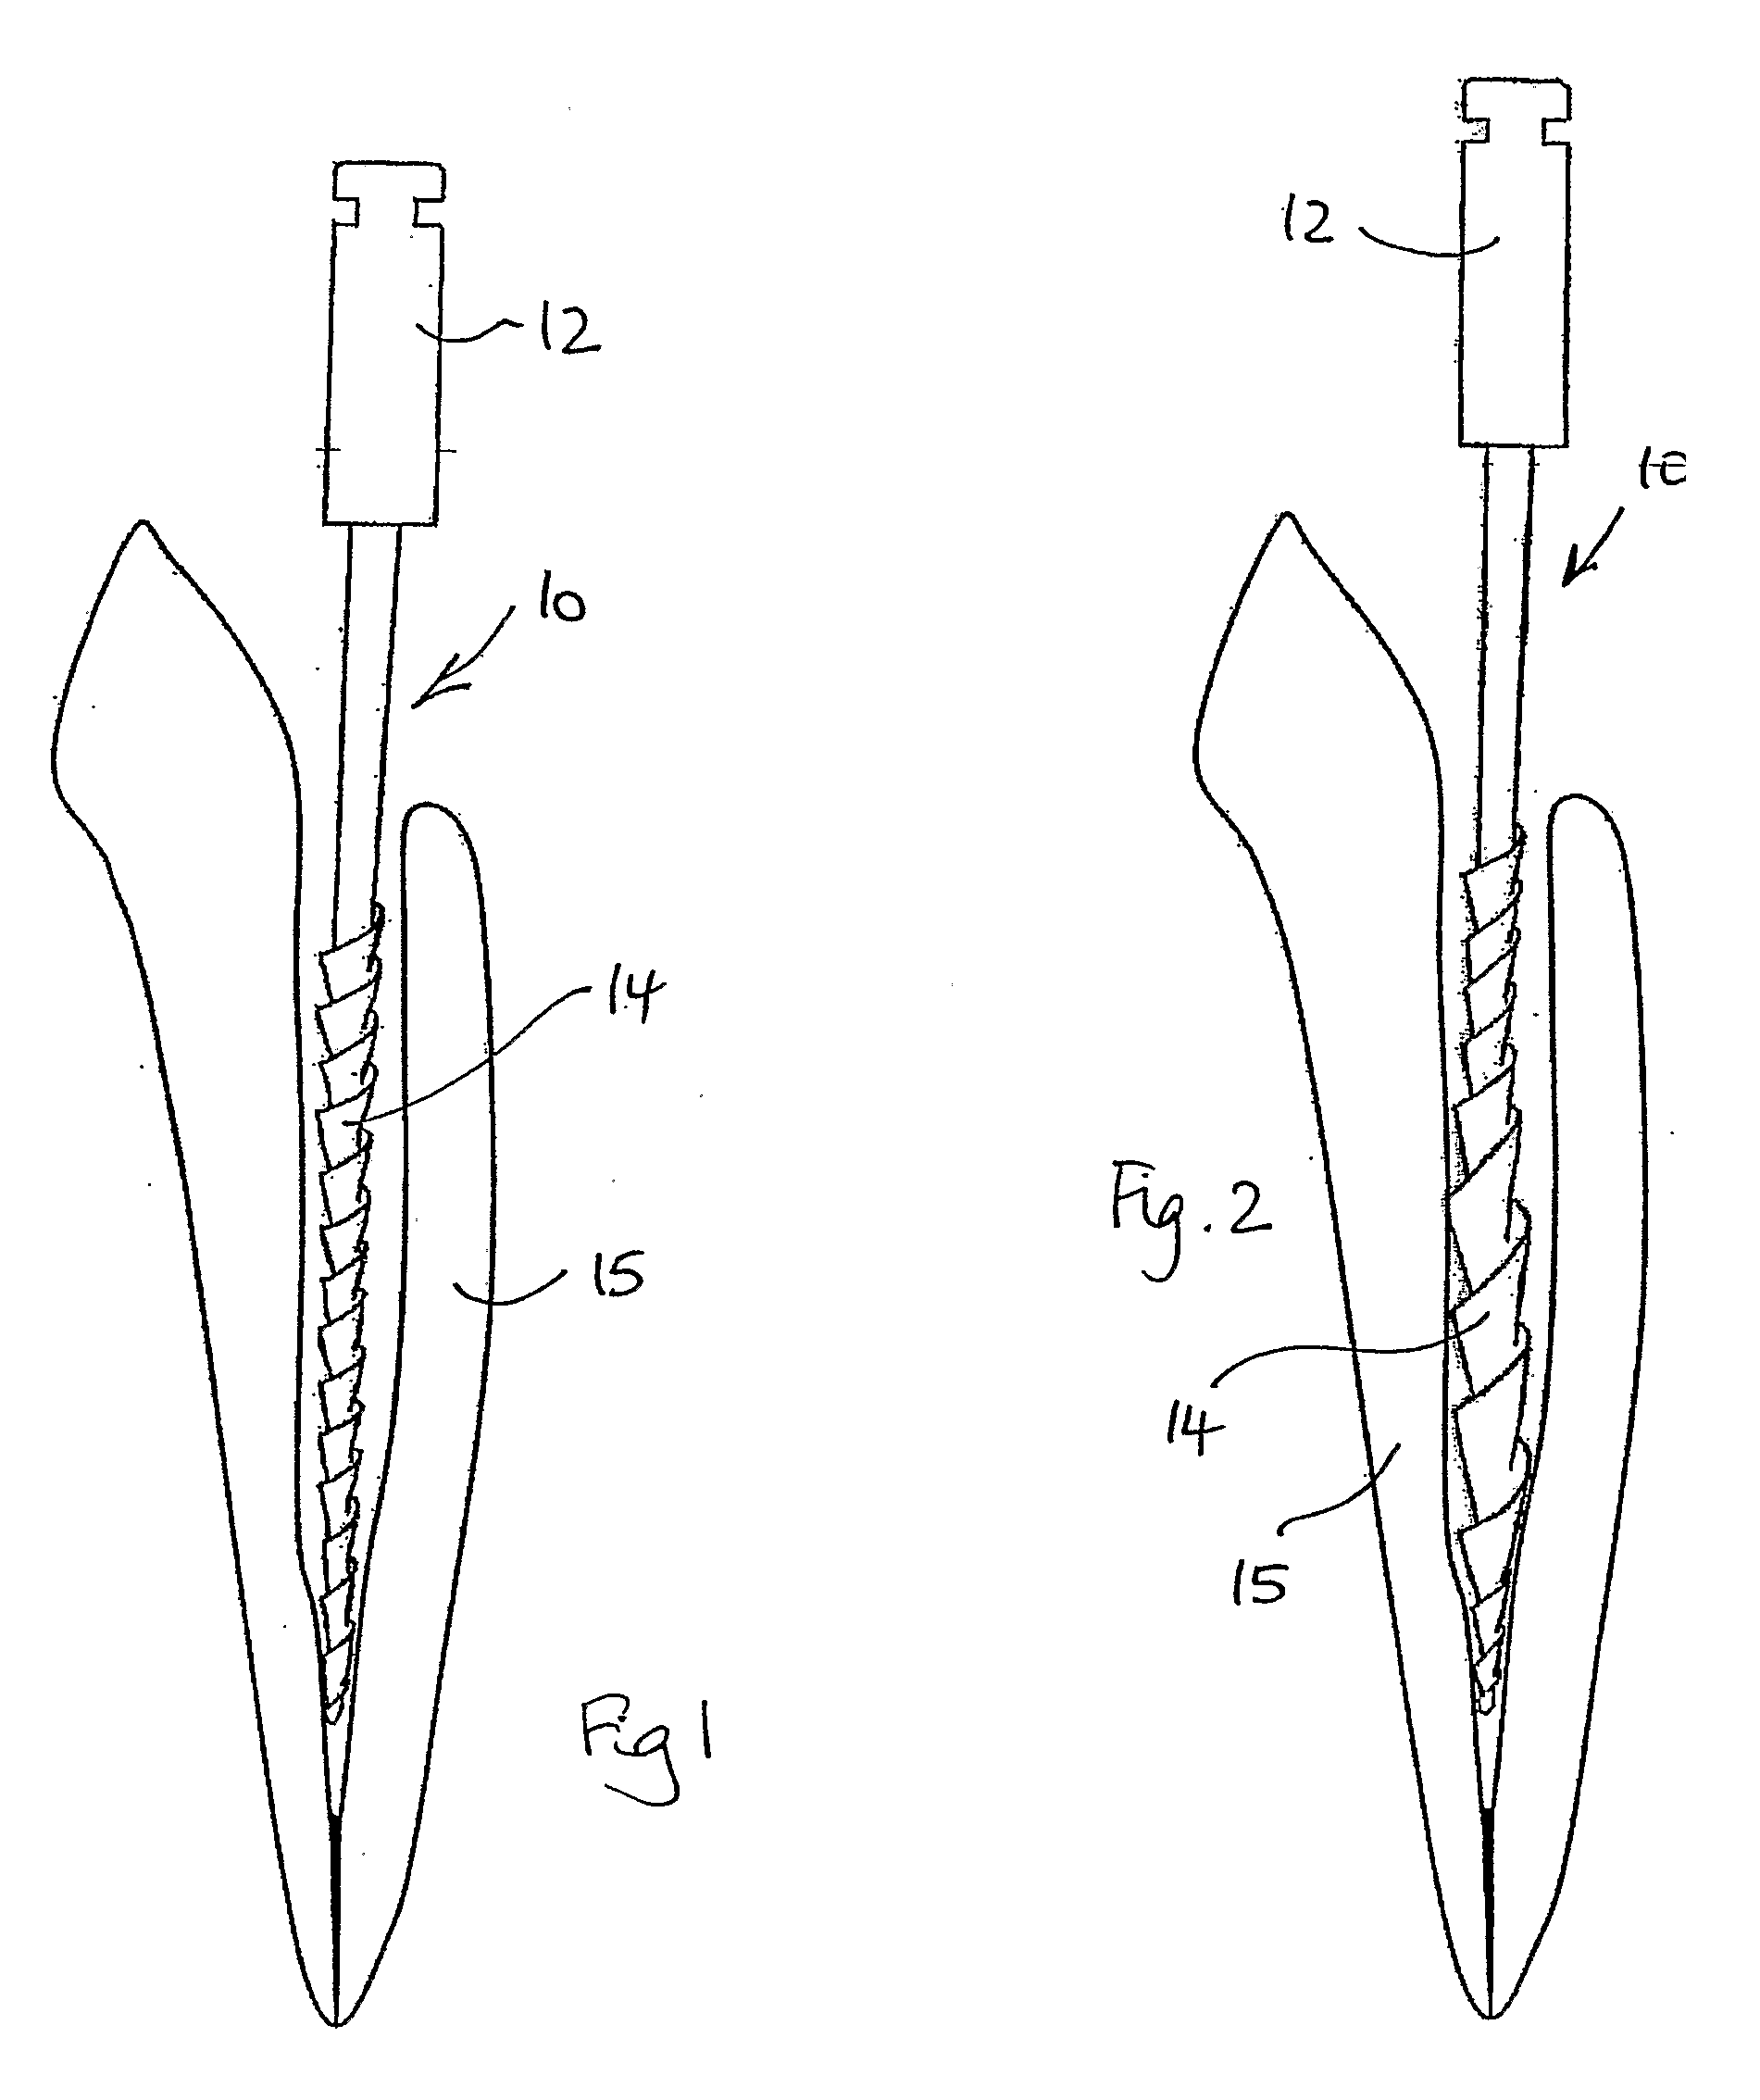 Dental apparatus for shaping and cleaning a root canal